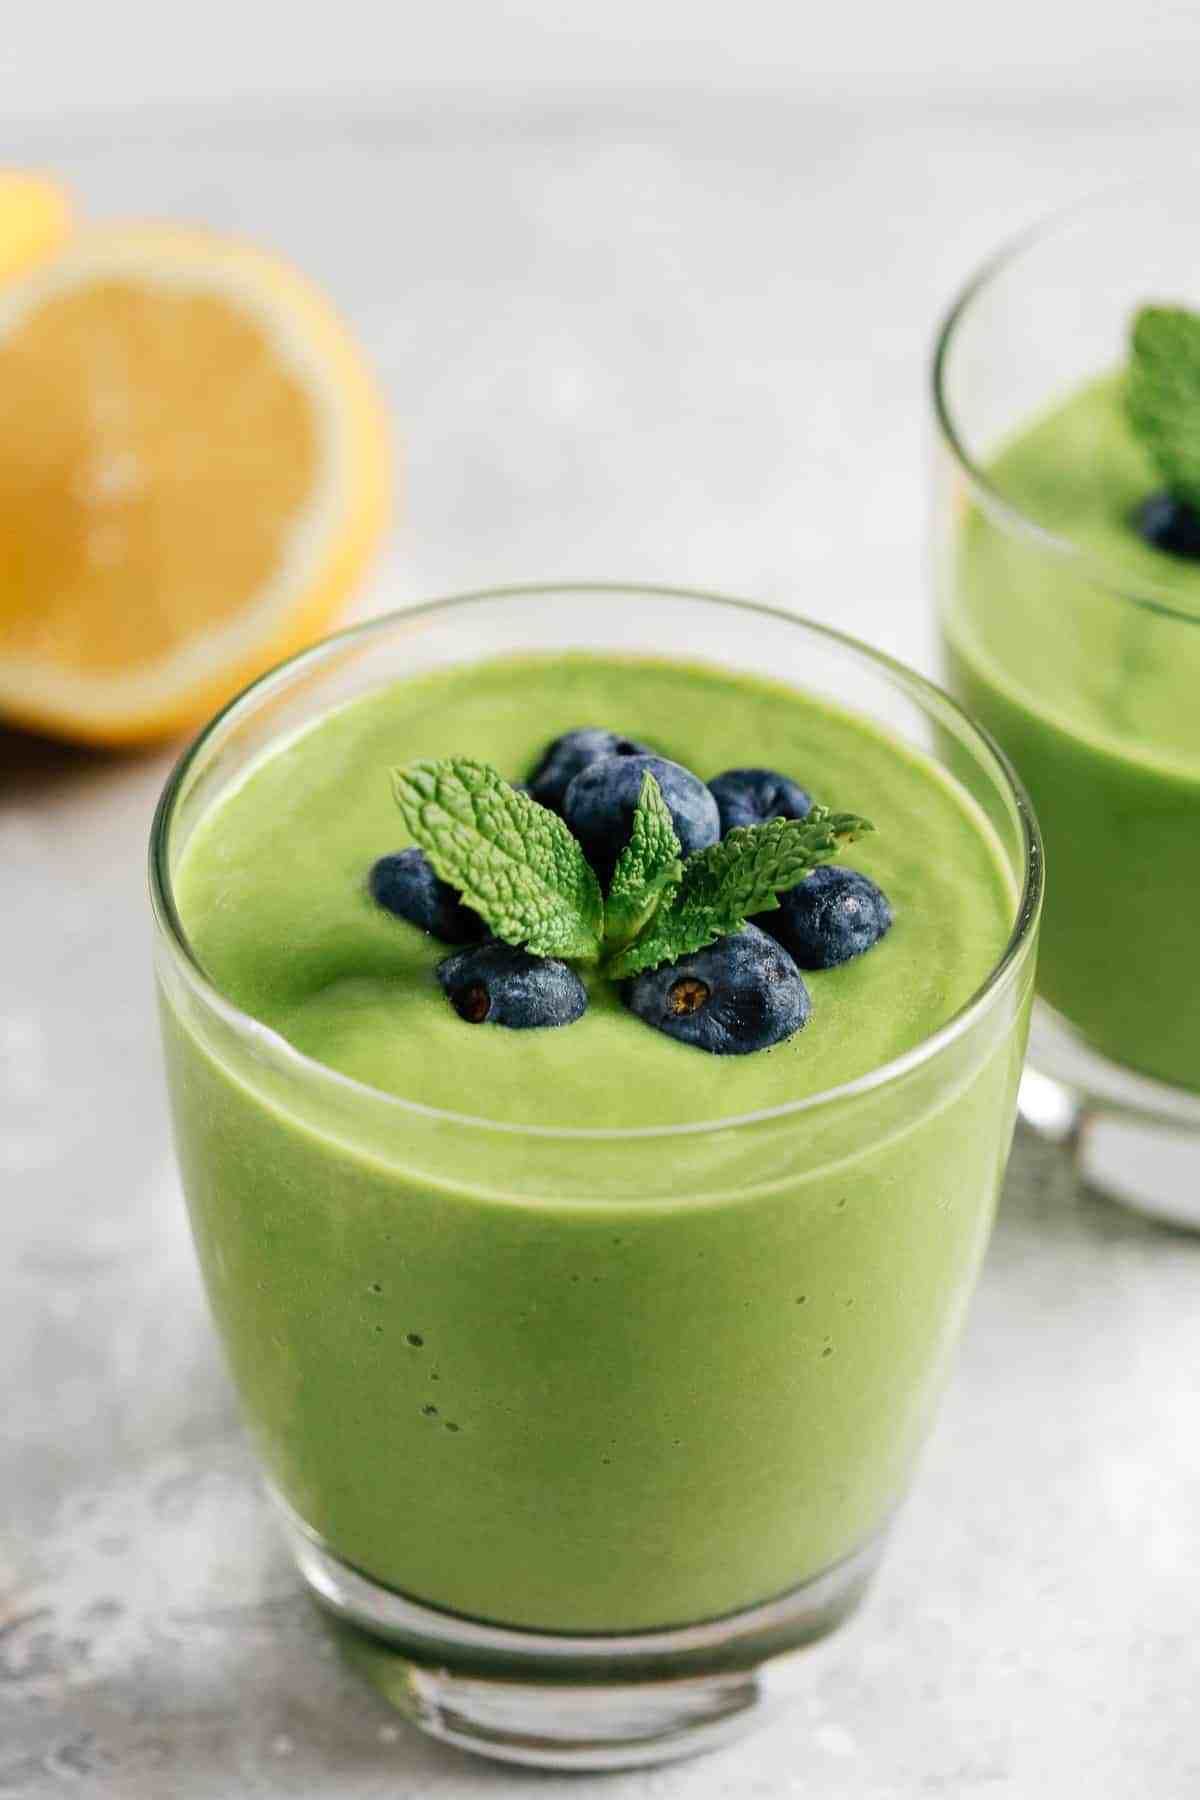 This low carb green smoothie tastes great and provides healthy fats ...